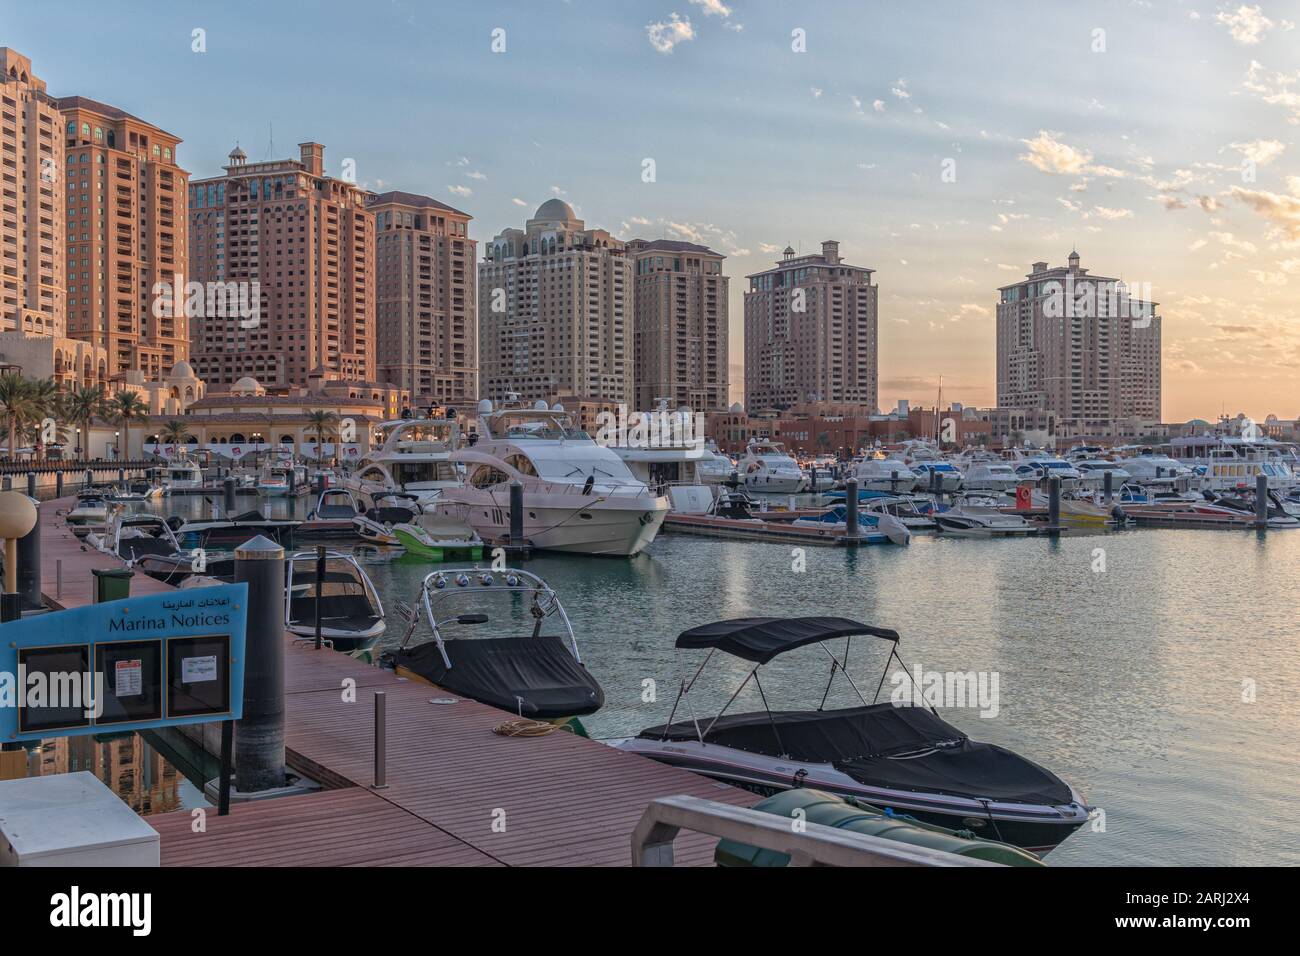 Doha,Qatar-January 25,2020:  The pearl Marina daylight view with Yachts in foreground, buildings and clouds in the sky in background Stock Photo